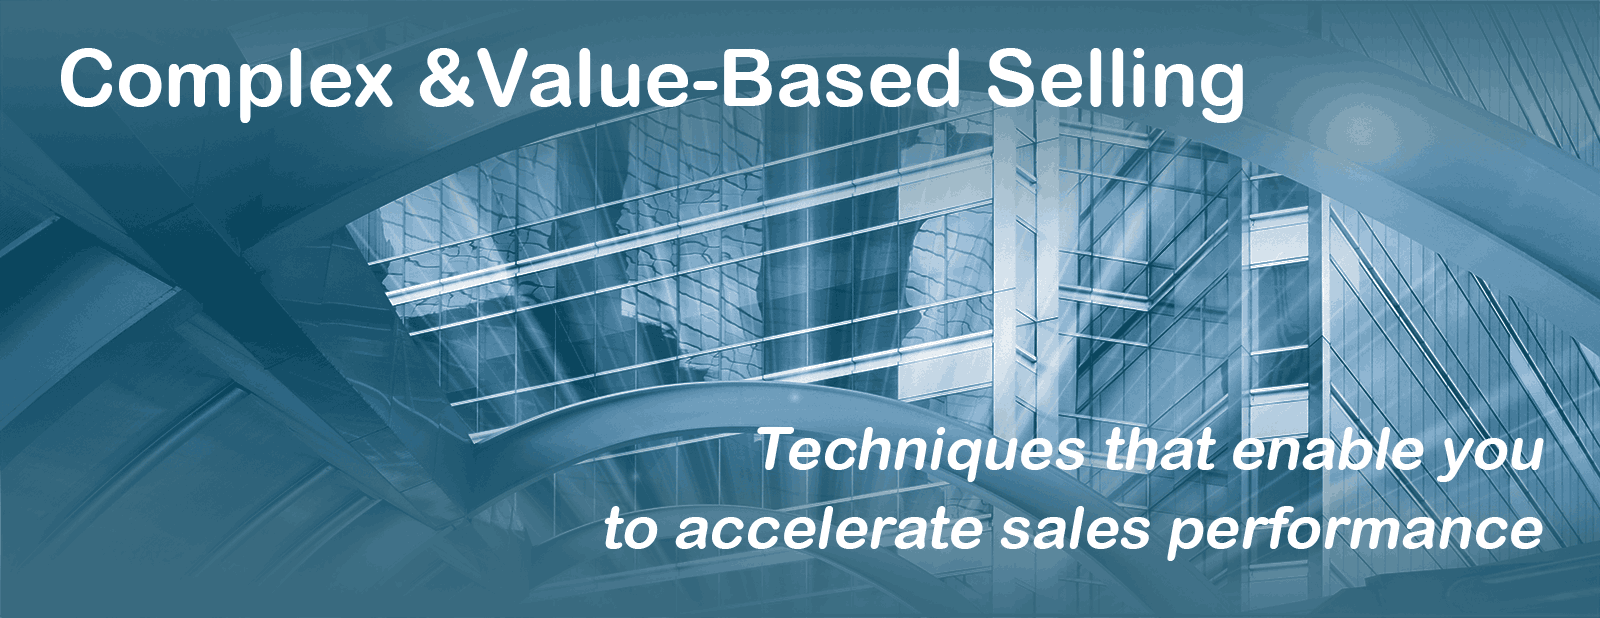 Complex & Value Based Selling - Techniques that enable you to accelerate sales performance